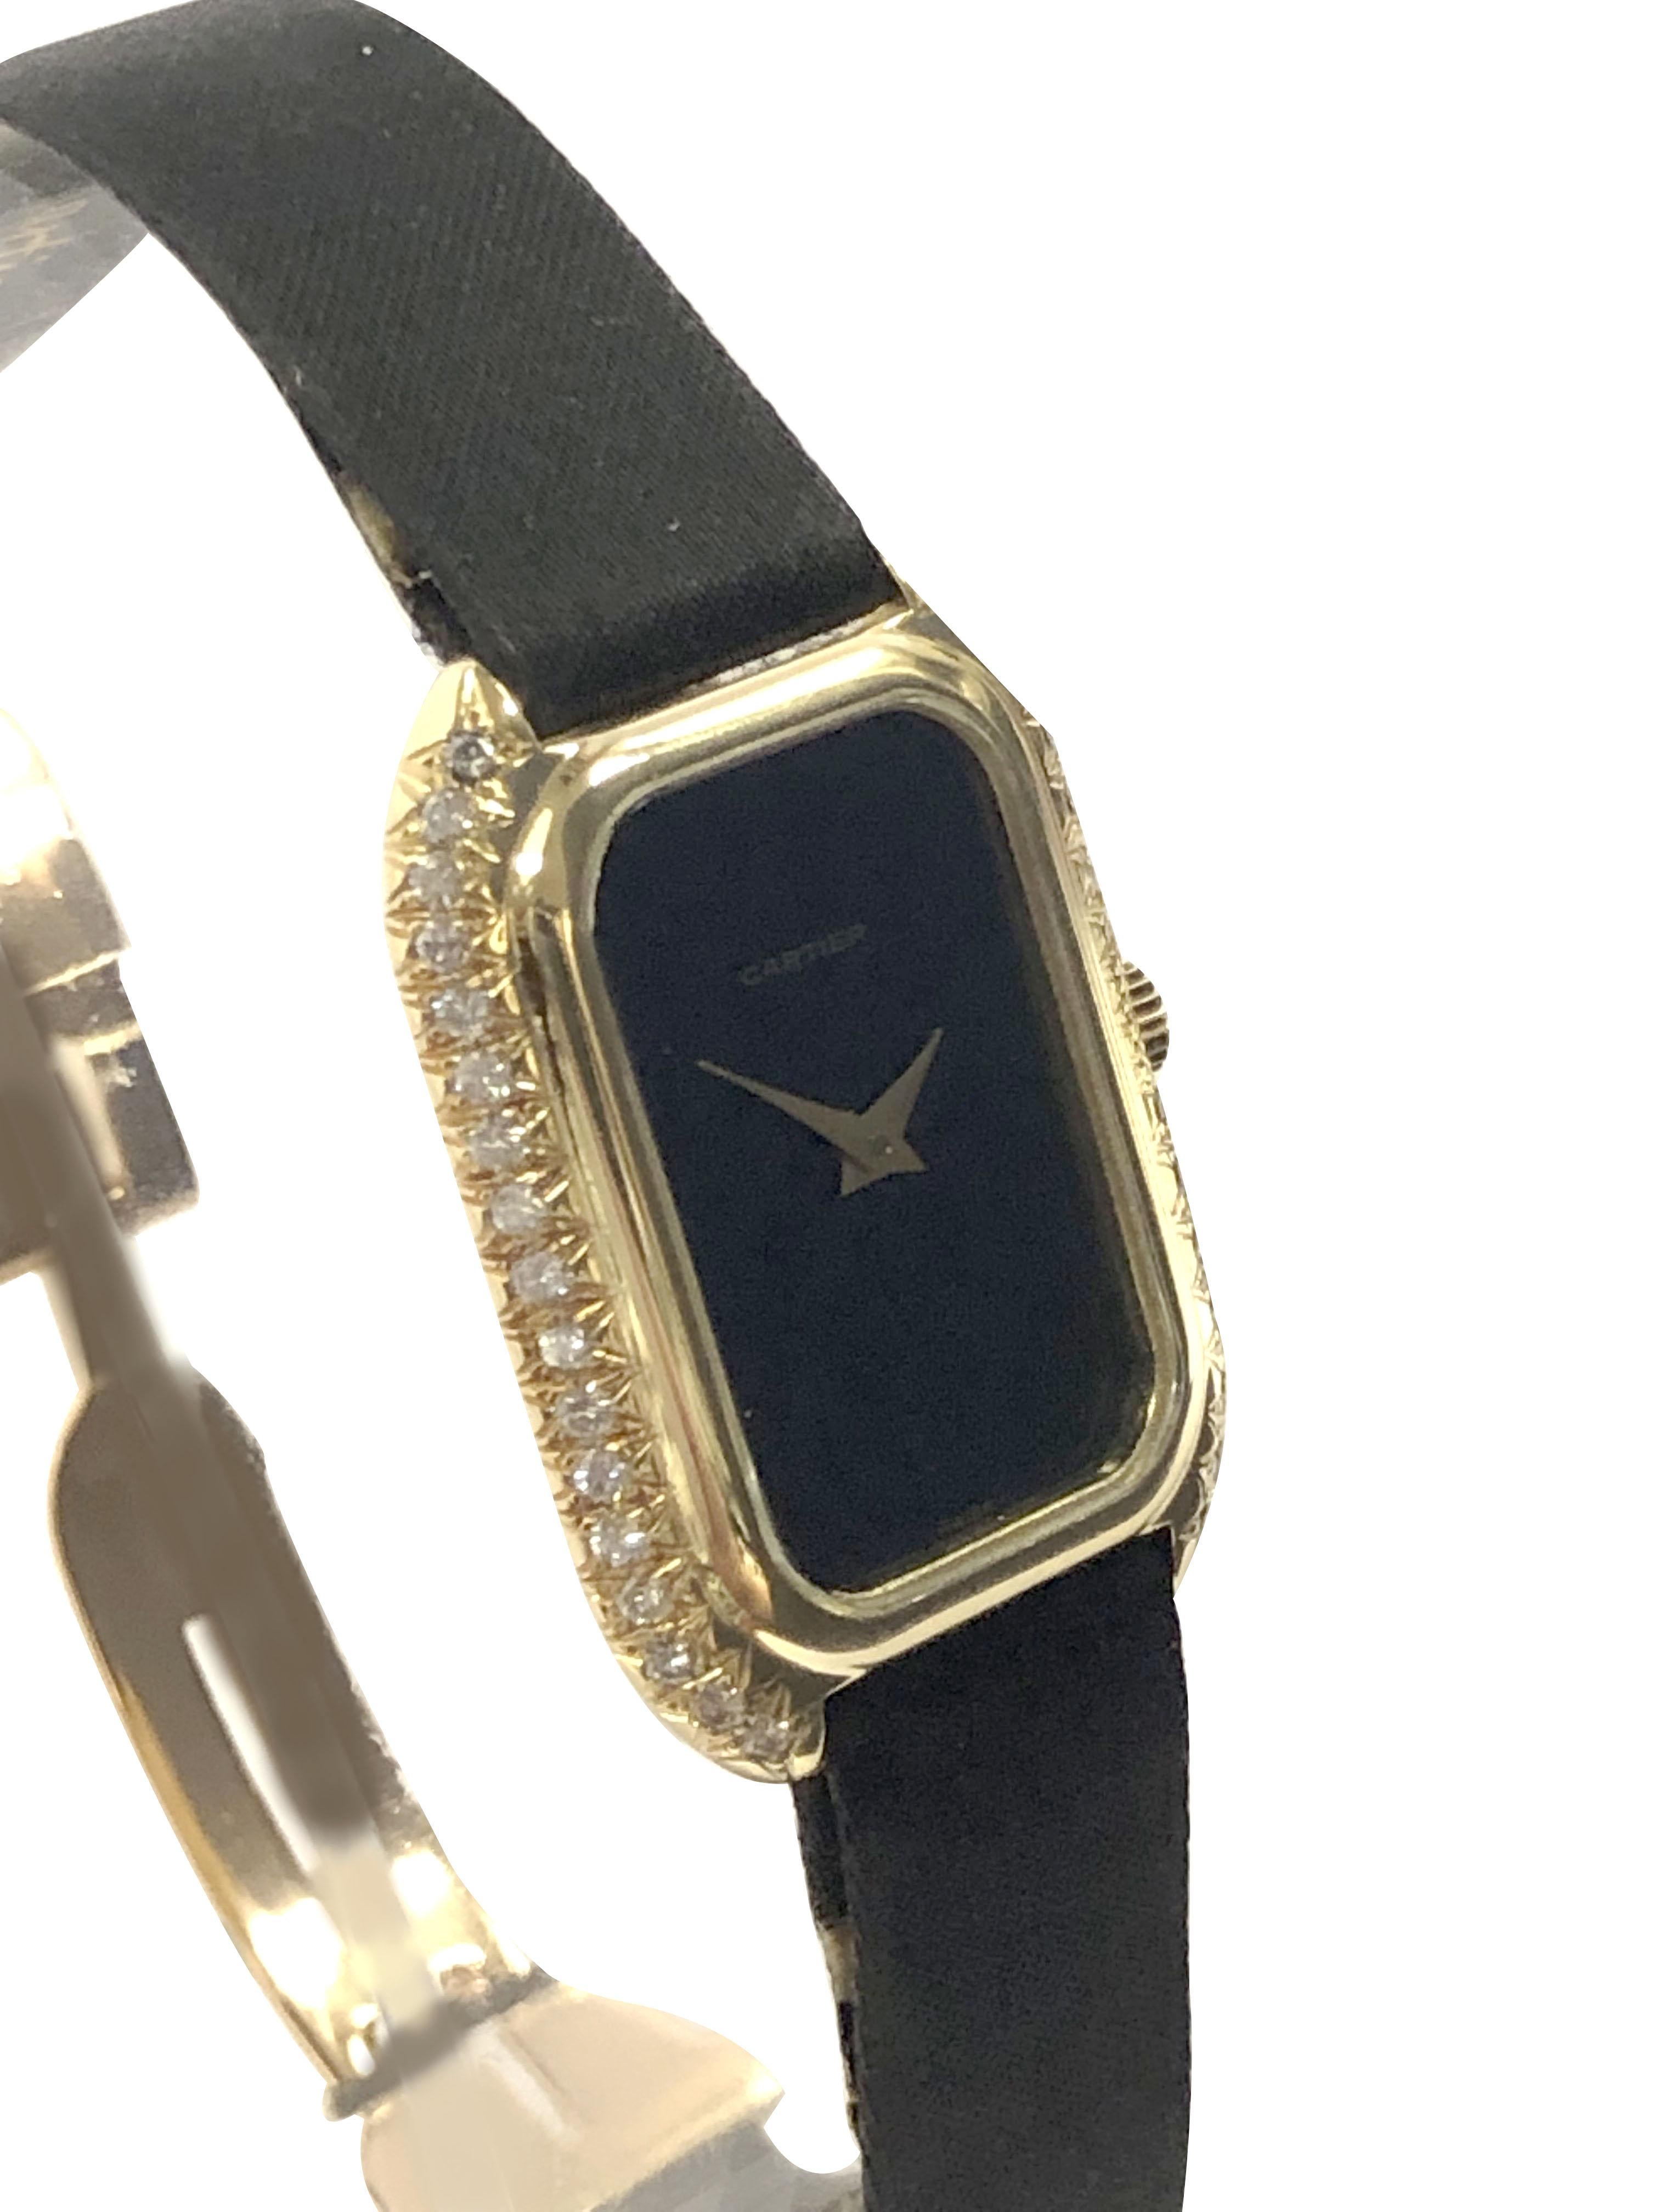 Circa 1970s Cartier Ladies Wrist Watch, 30 X 21 M.M. 18k Yellow Gold 2 piece case with Cartier Factory set Round Brilliant cut diamonds totaling .40 Carat. Cartier Inc. 17 Jewel Nickle Lever, Mechanical, Manual wind movement.Black Dial with Gold